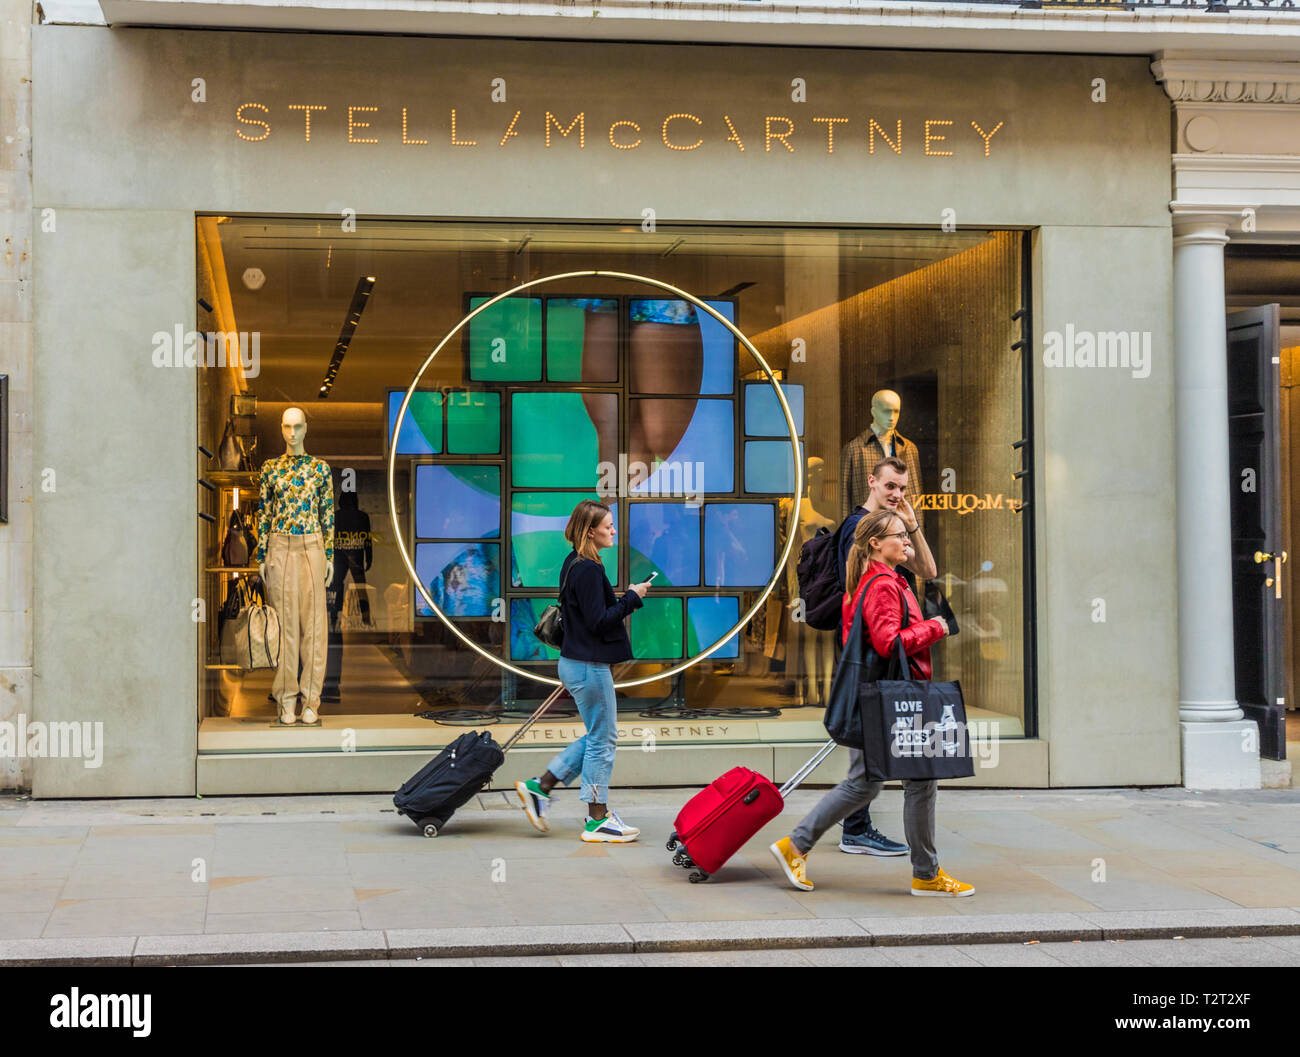 Stella mccartney shop london hi-res stock photography and images - Alamy